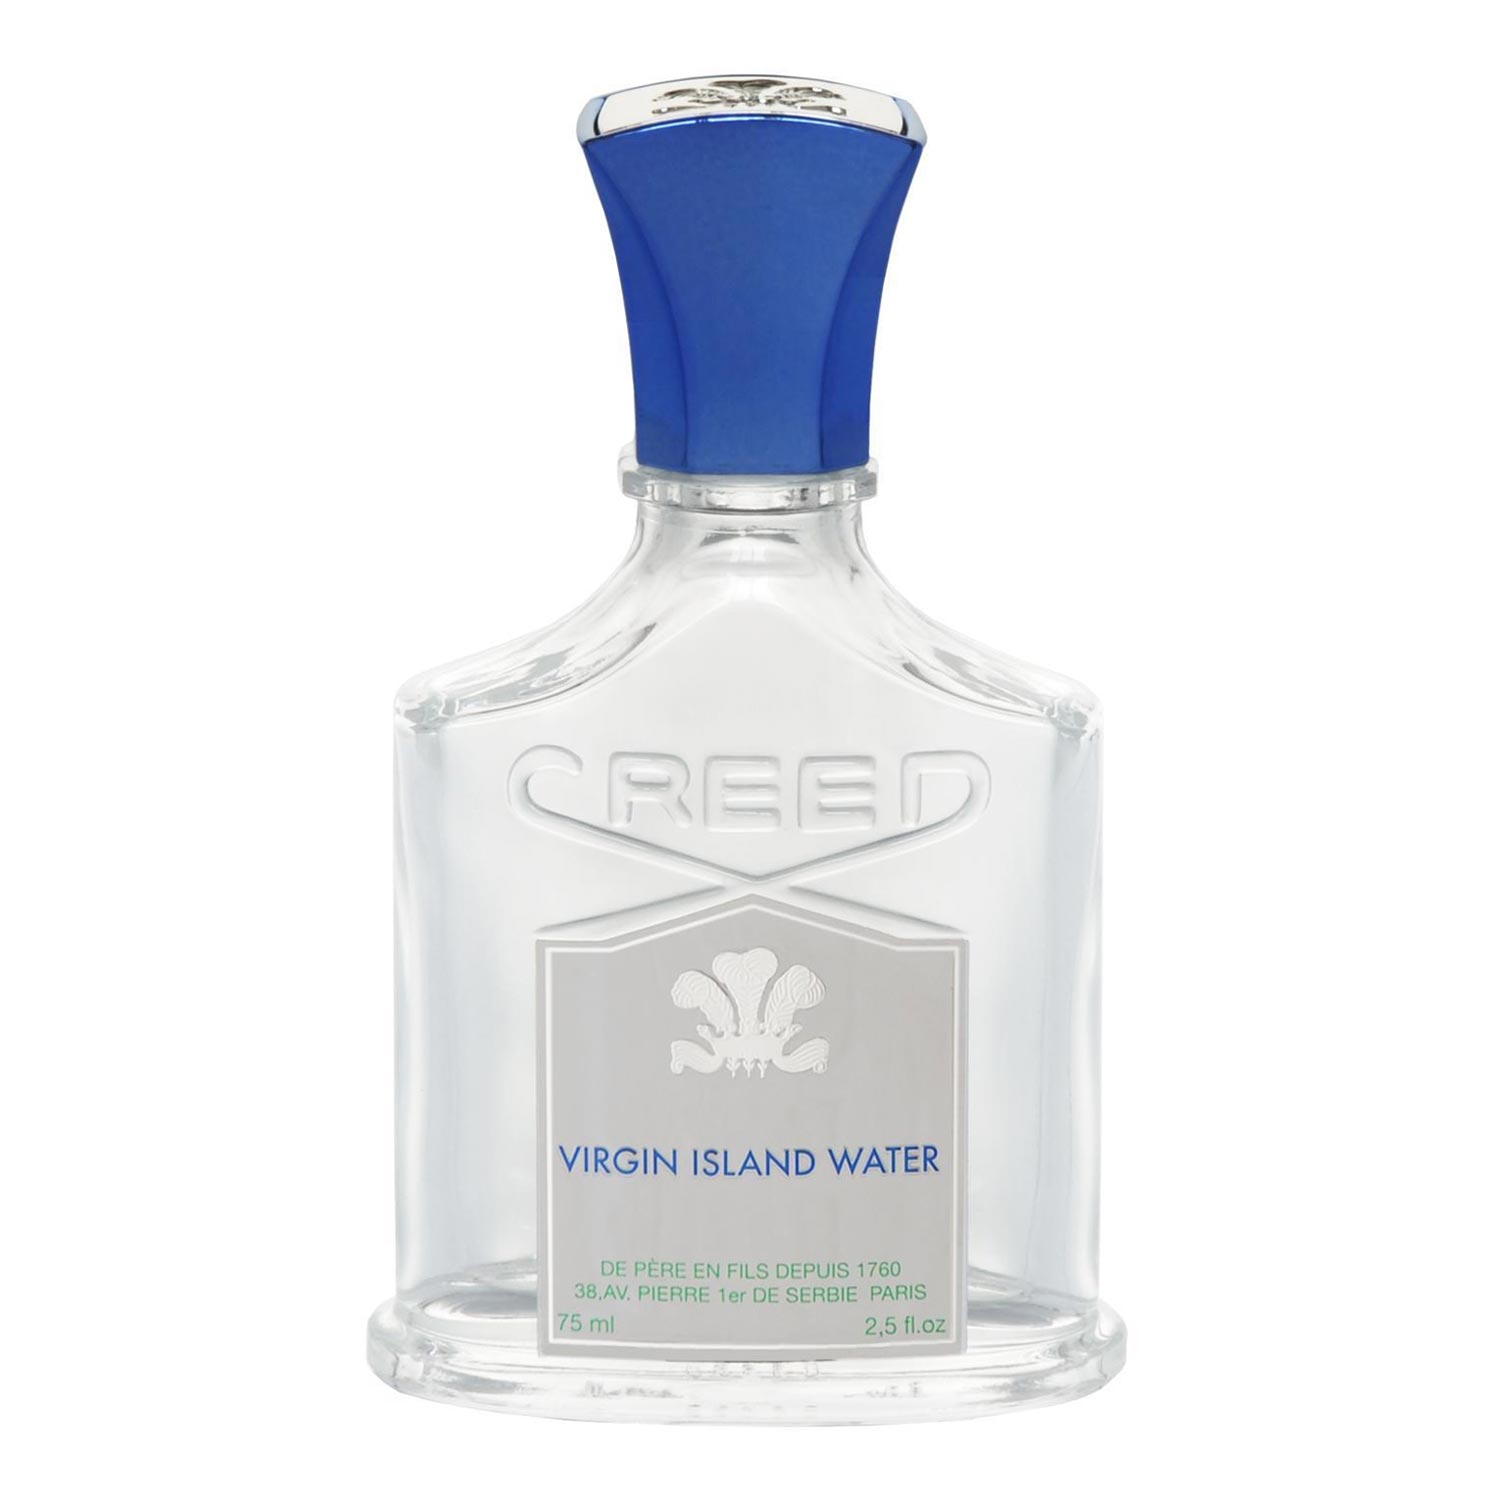 Creed virgin island water cologne